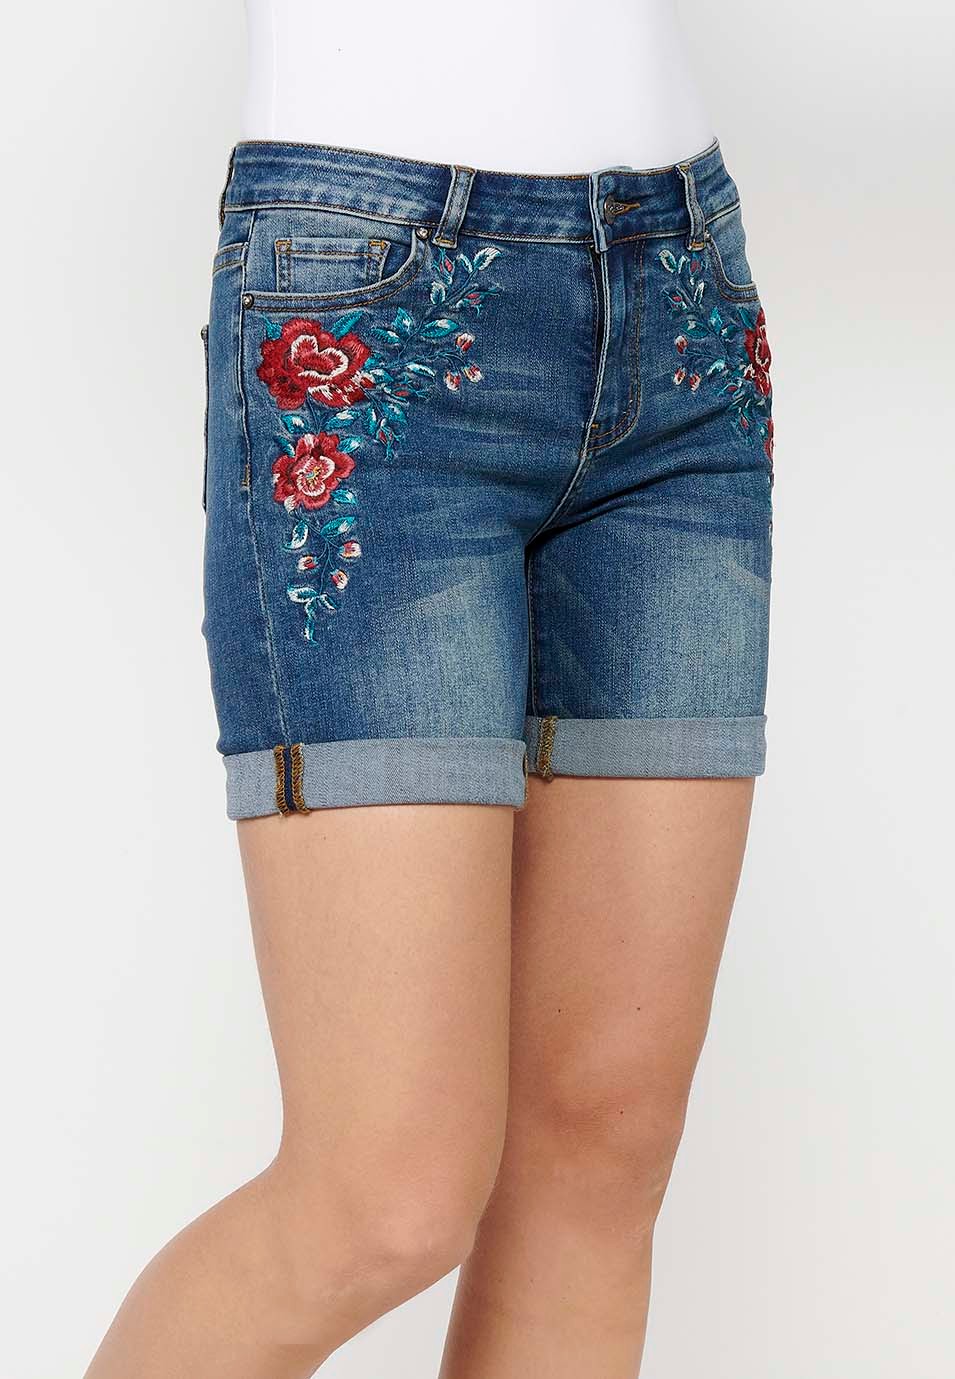 Denim shorts with front zipper and button closure and front floral embroidered details with five pockets, one pocket pocket, Dark Blue for Women 4